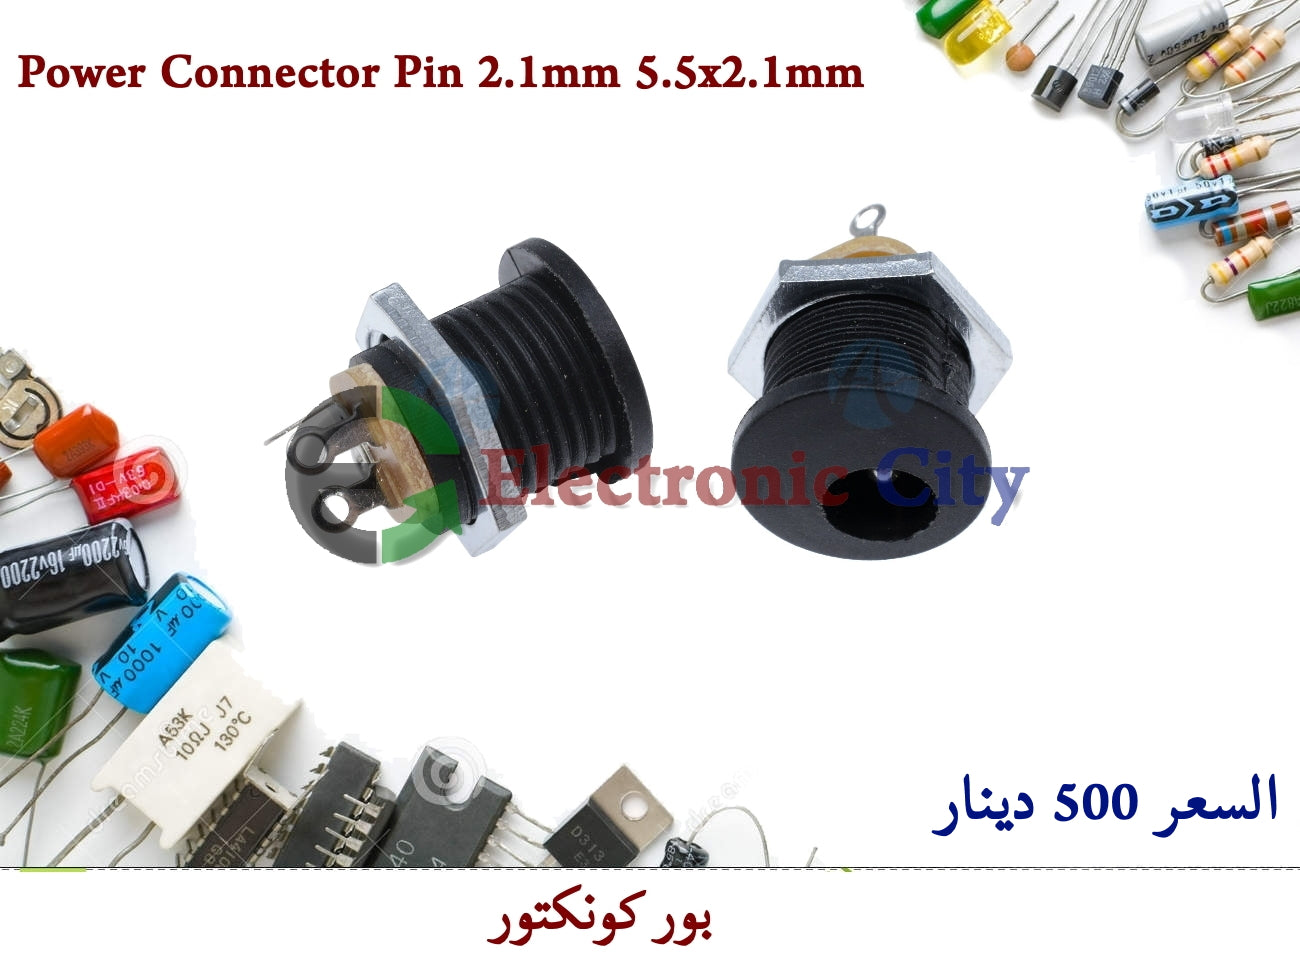 Power Connector Pin 2.1mm 5.5x2.1mm Female Suitable Plug